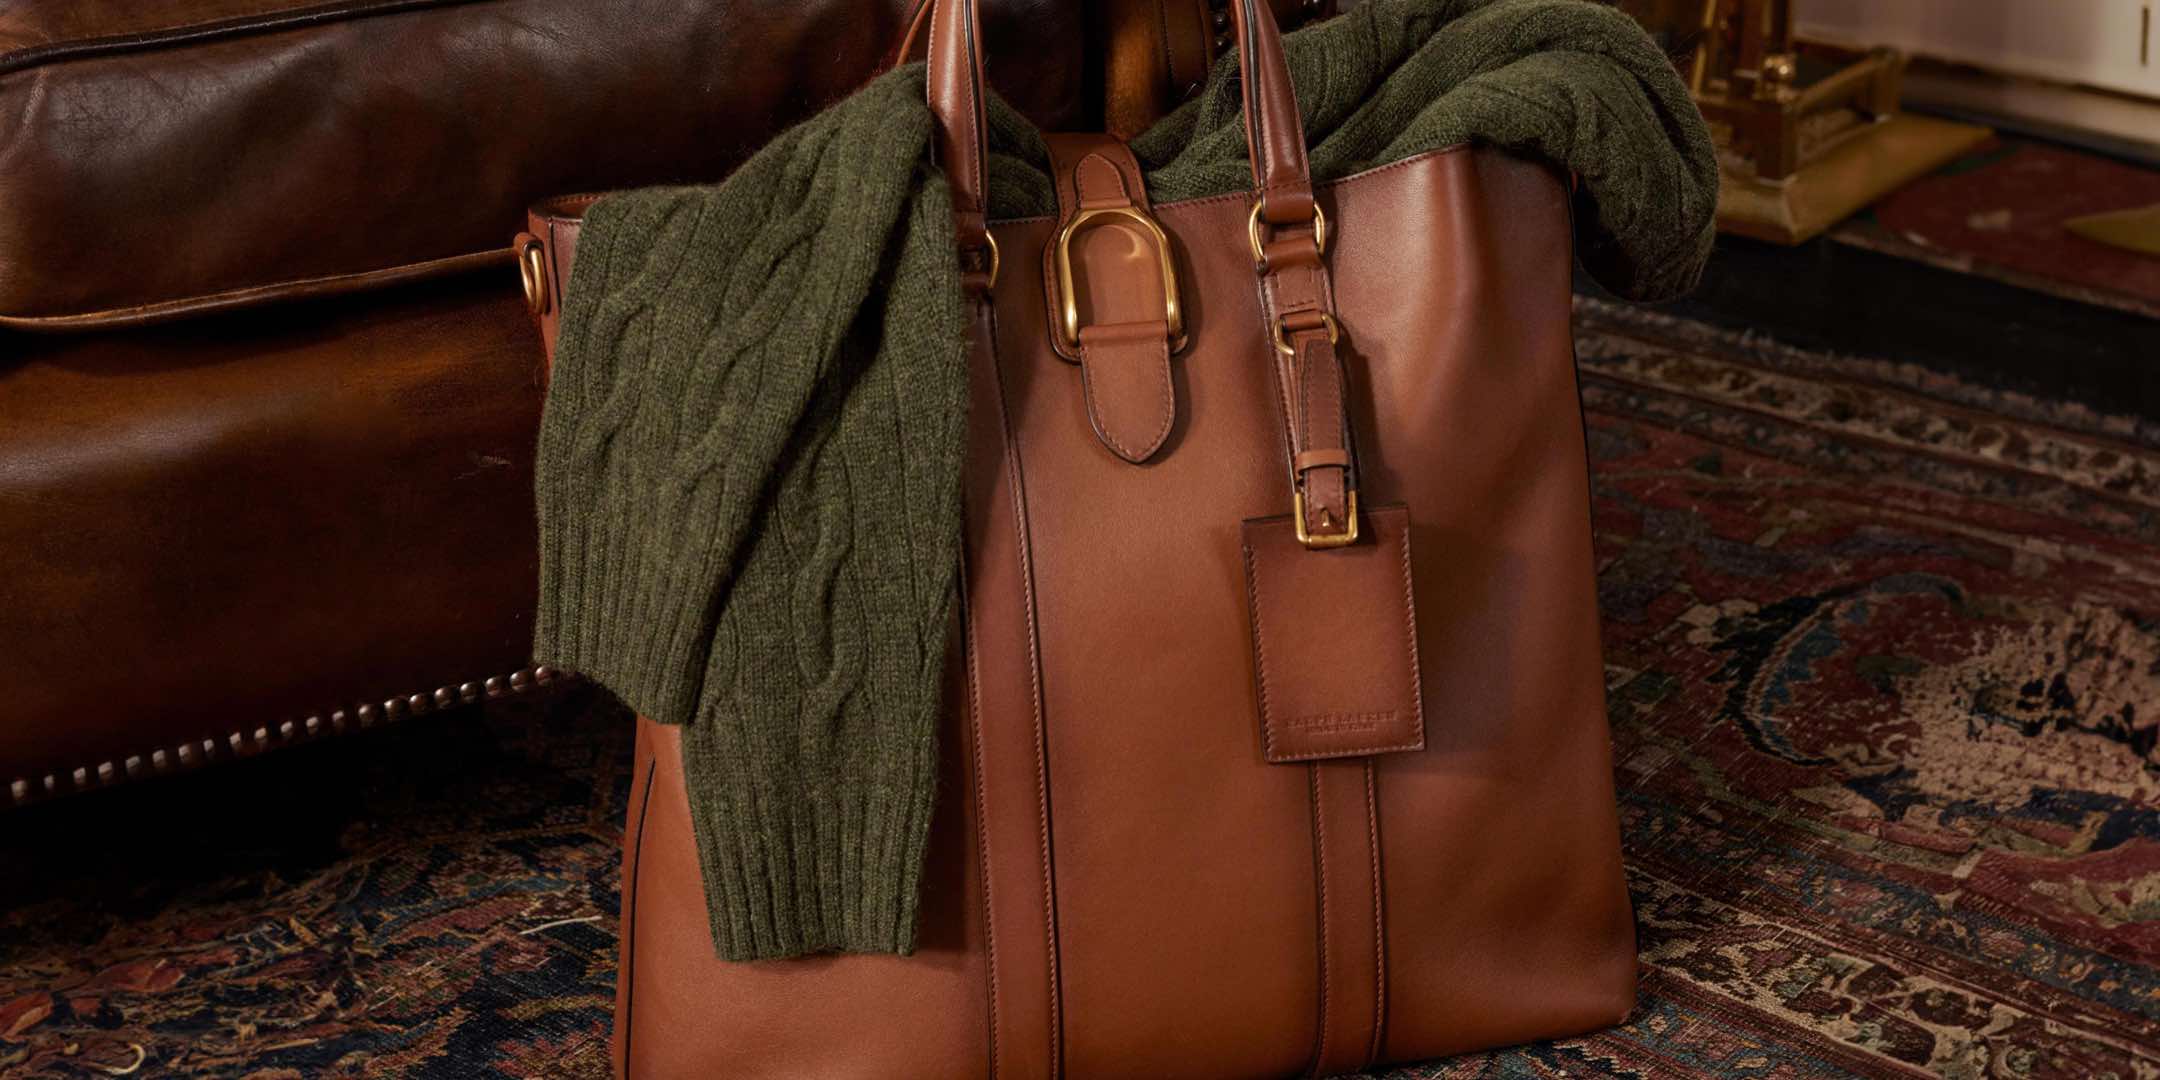 Olive cable knit on brown leather tote bag.